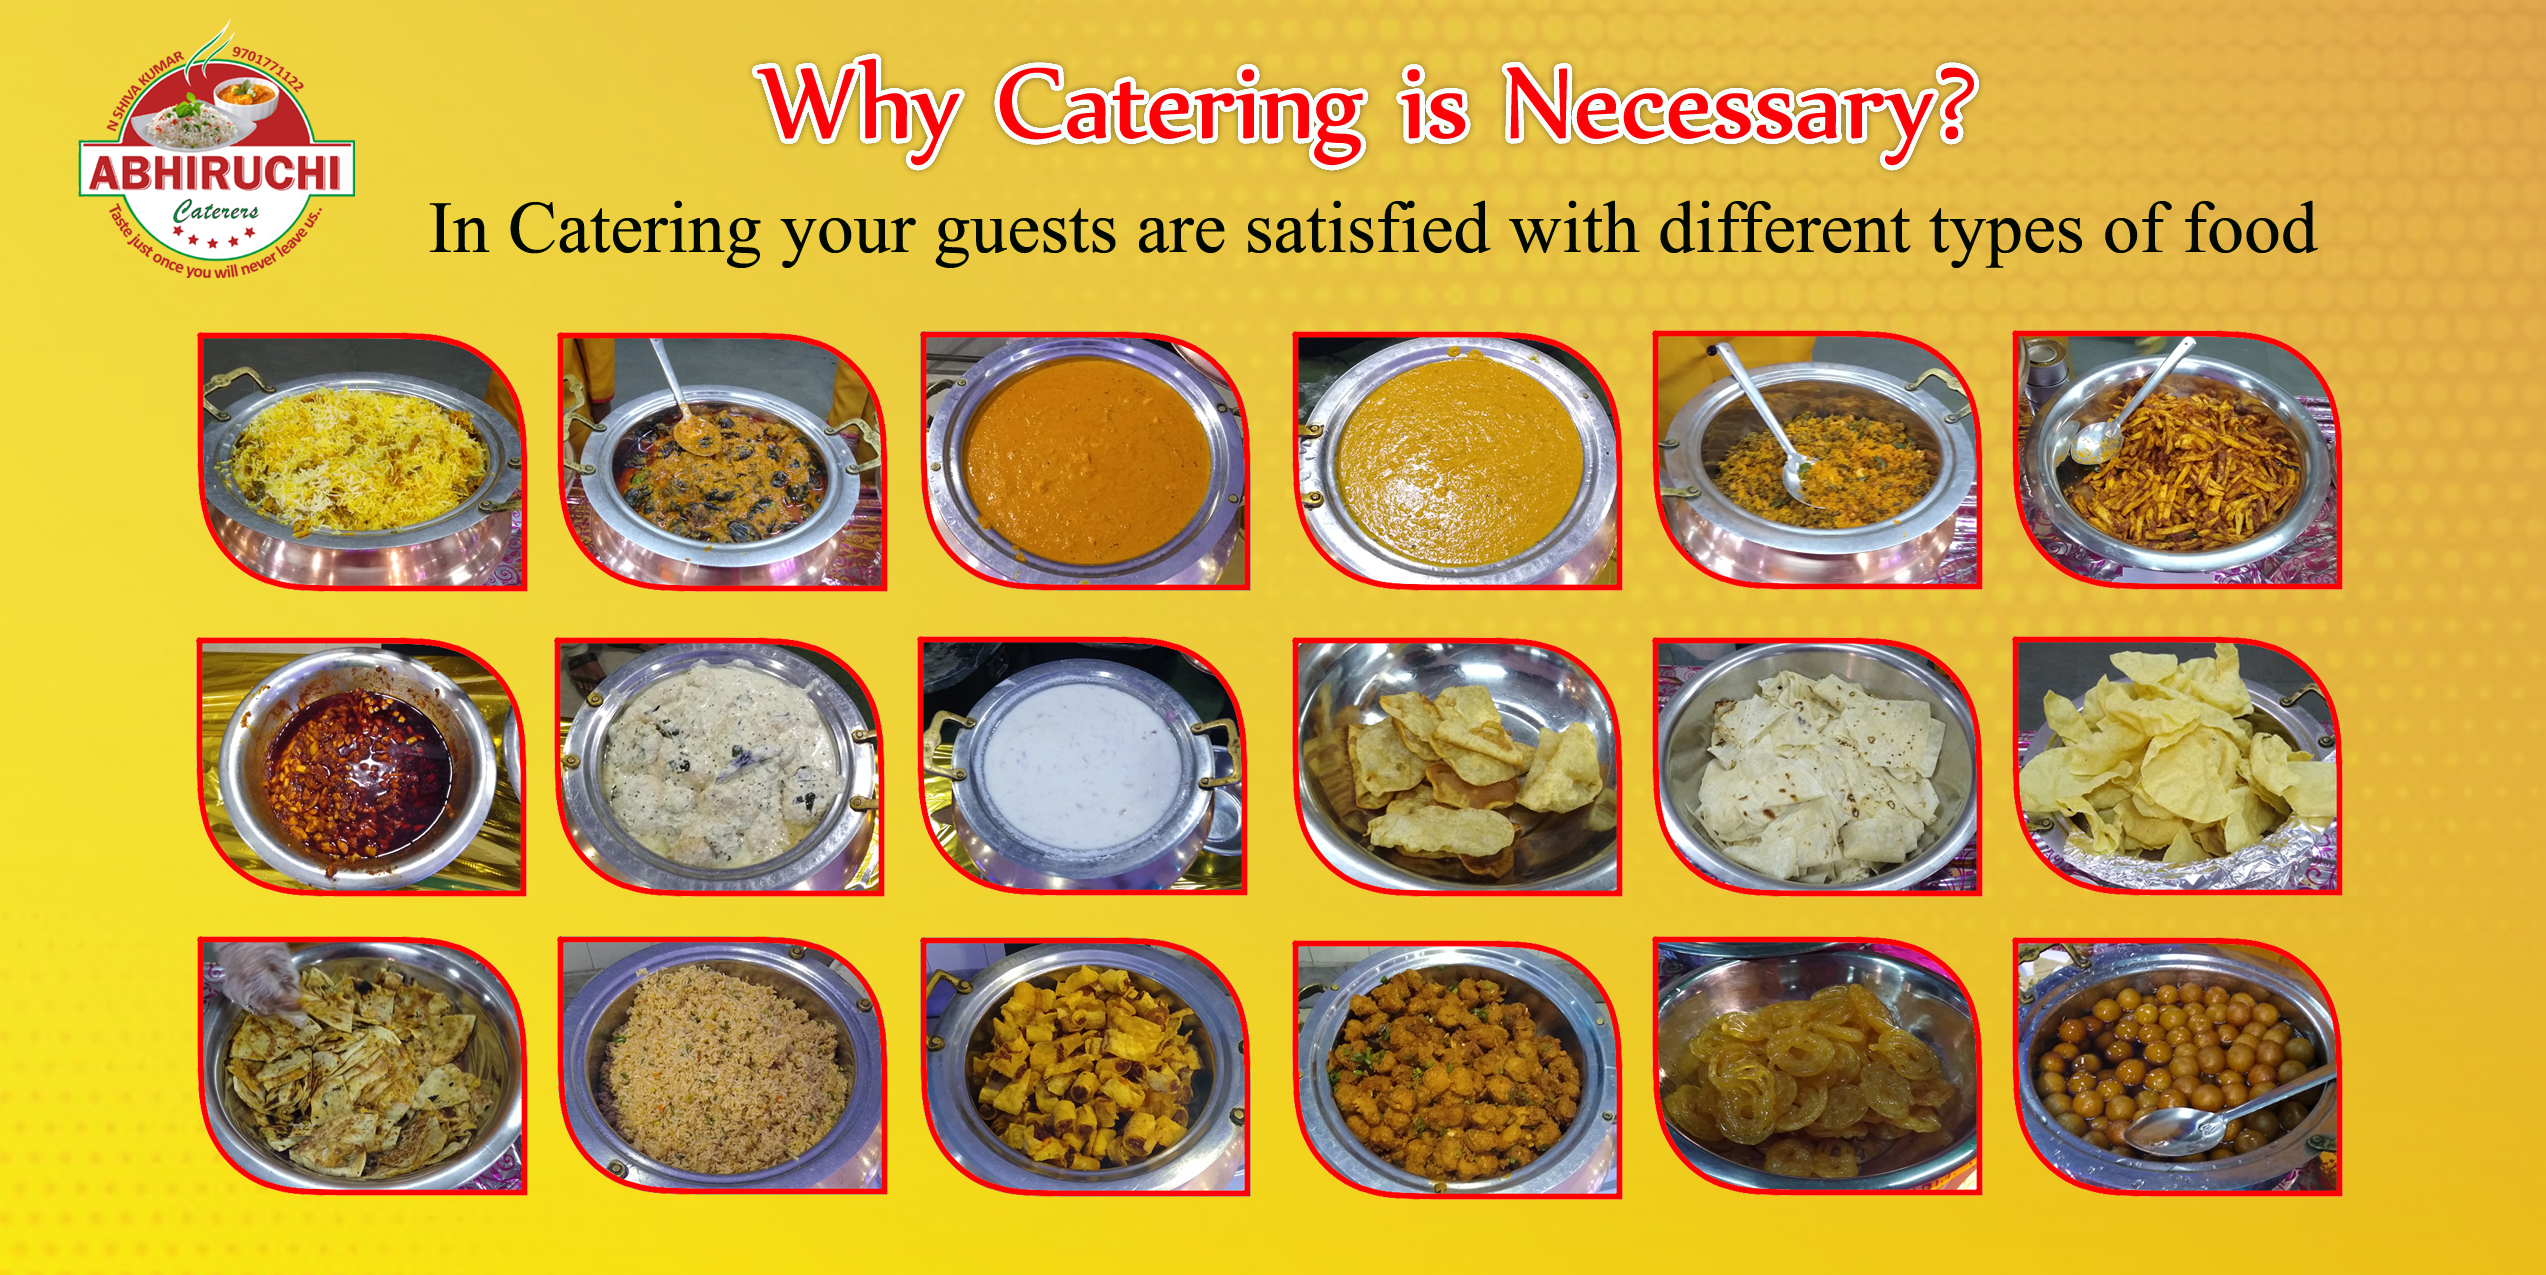 Why Catering is Necessary